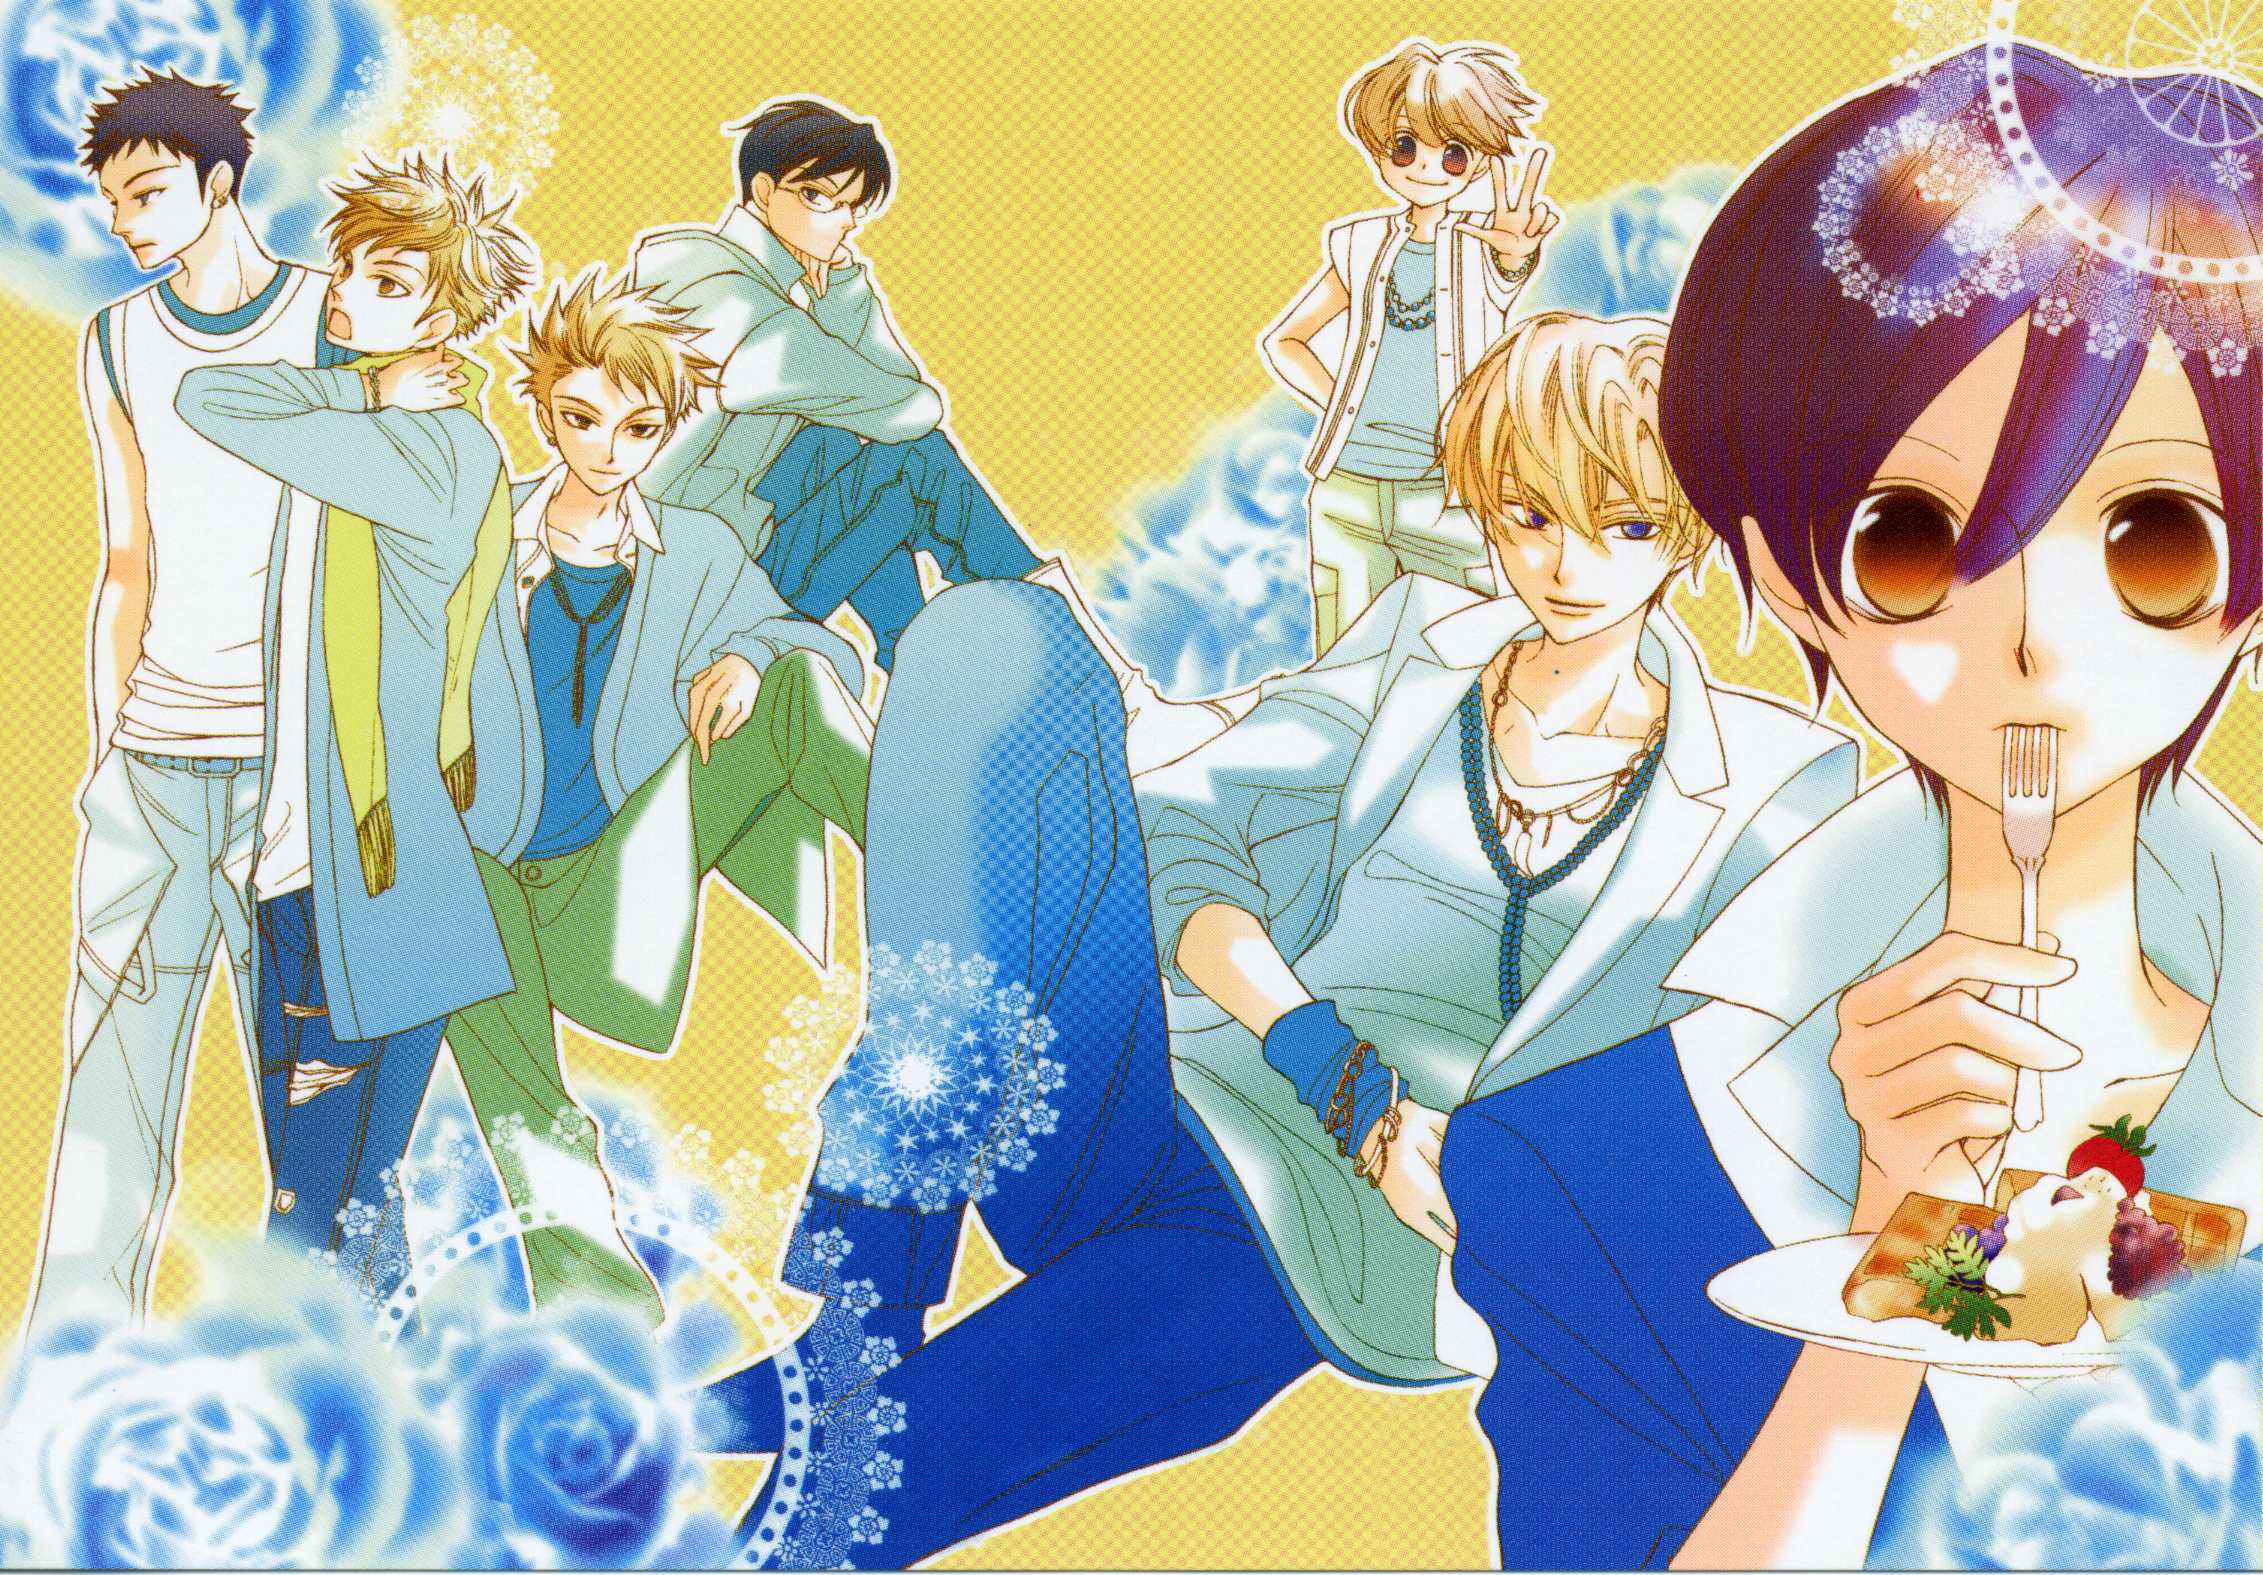 We Need To Talk About Ouran Highschool host Club - YouTube